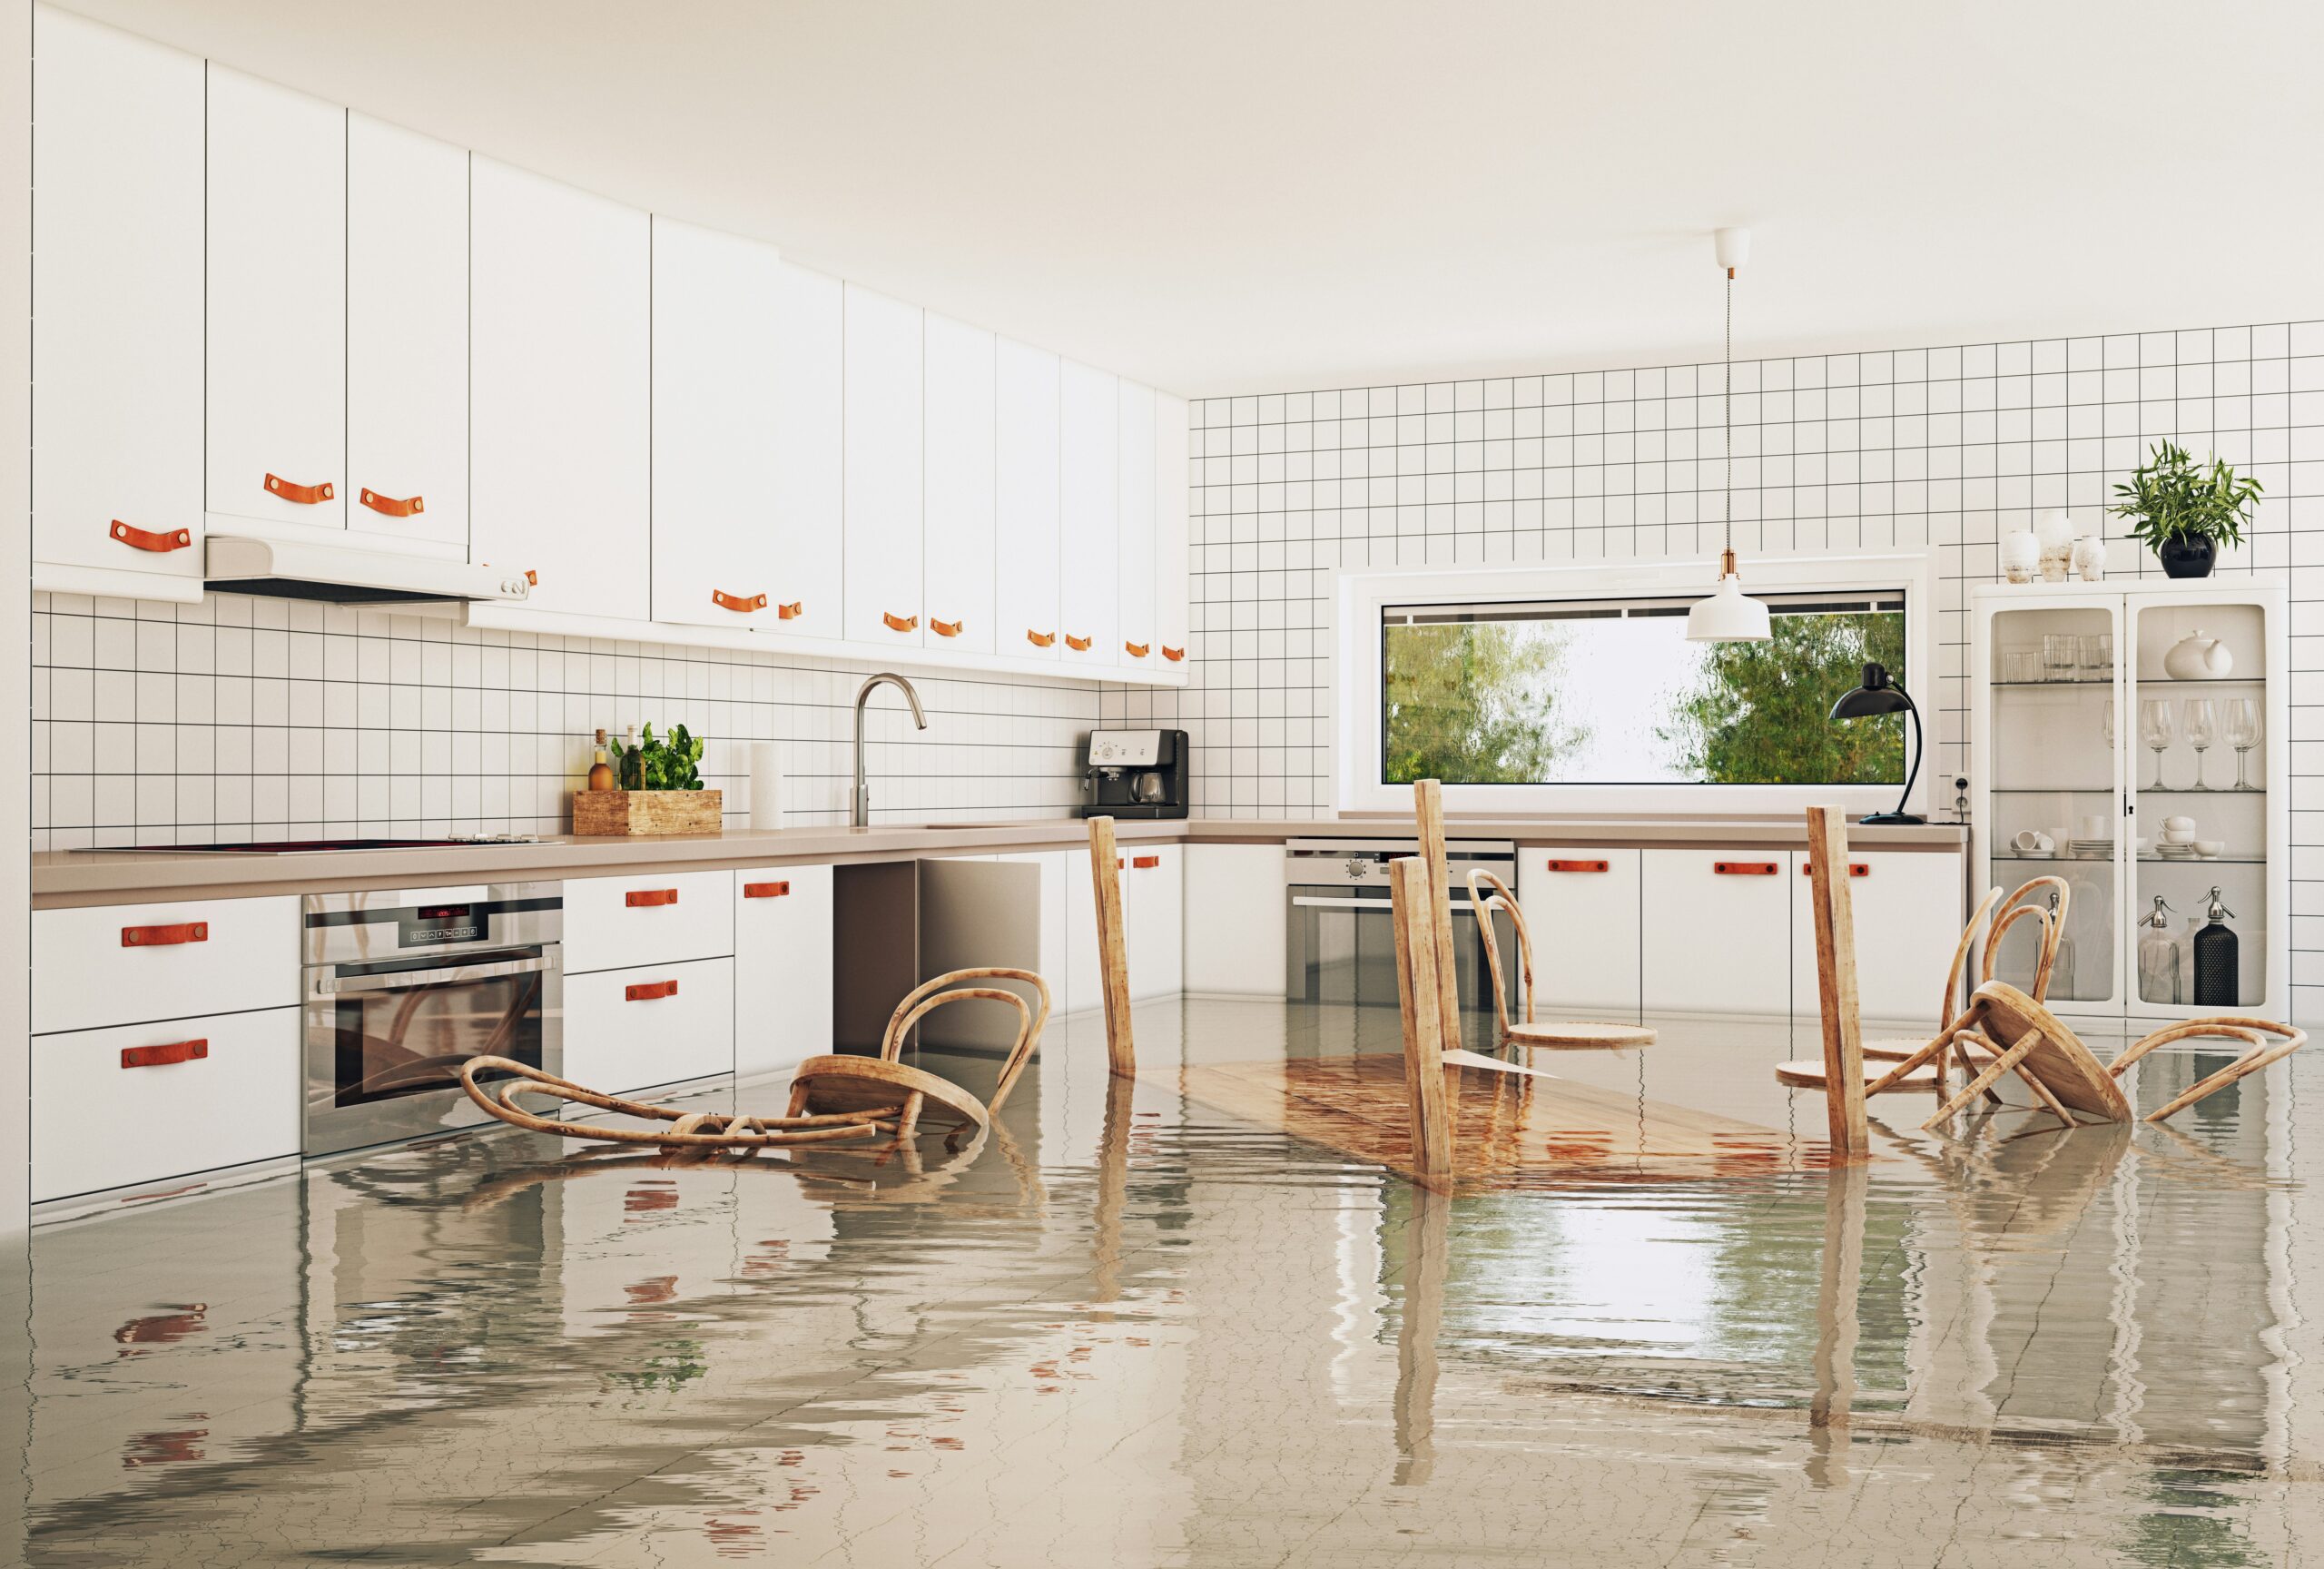 A flooded kitchen with chairs and a sink